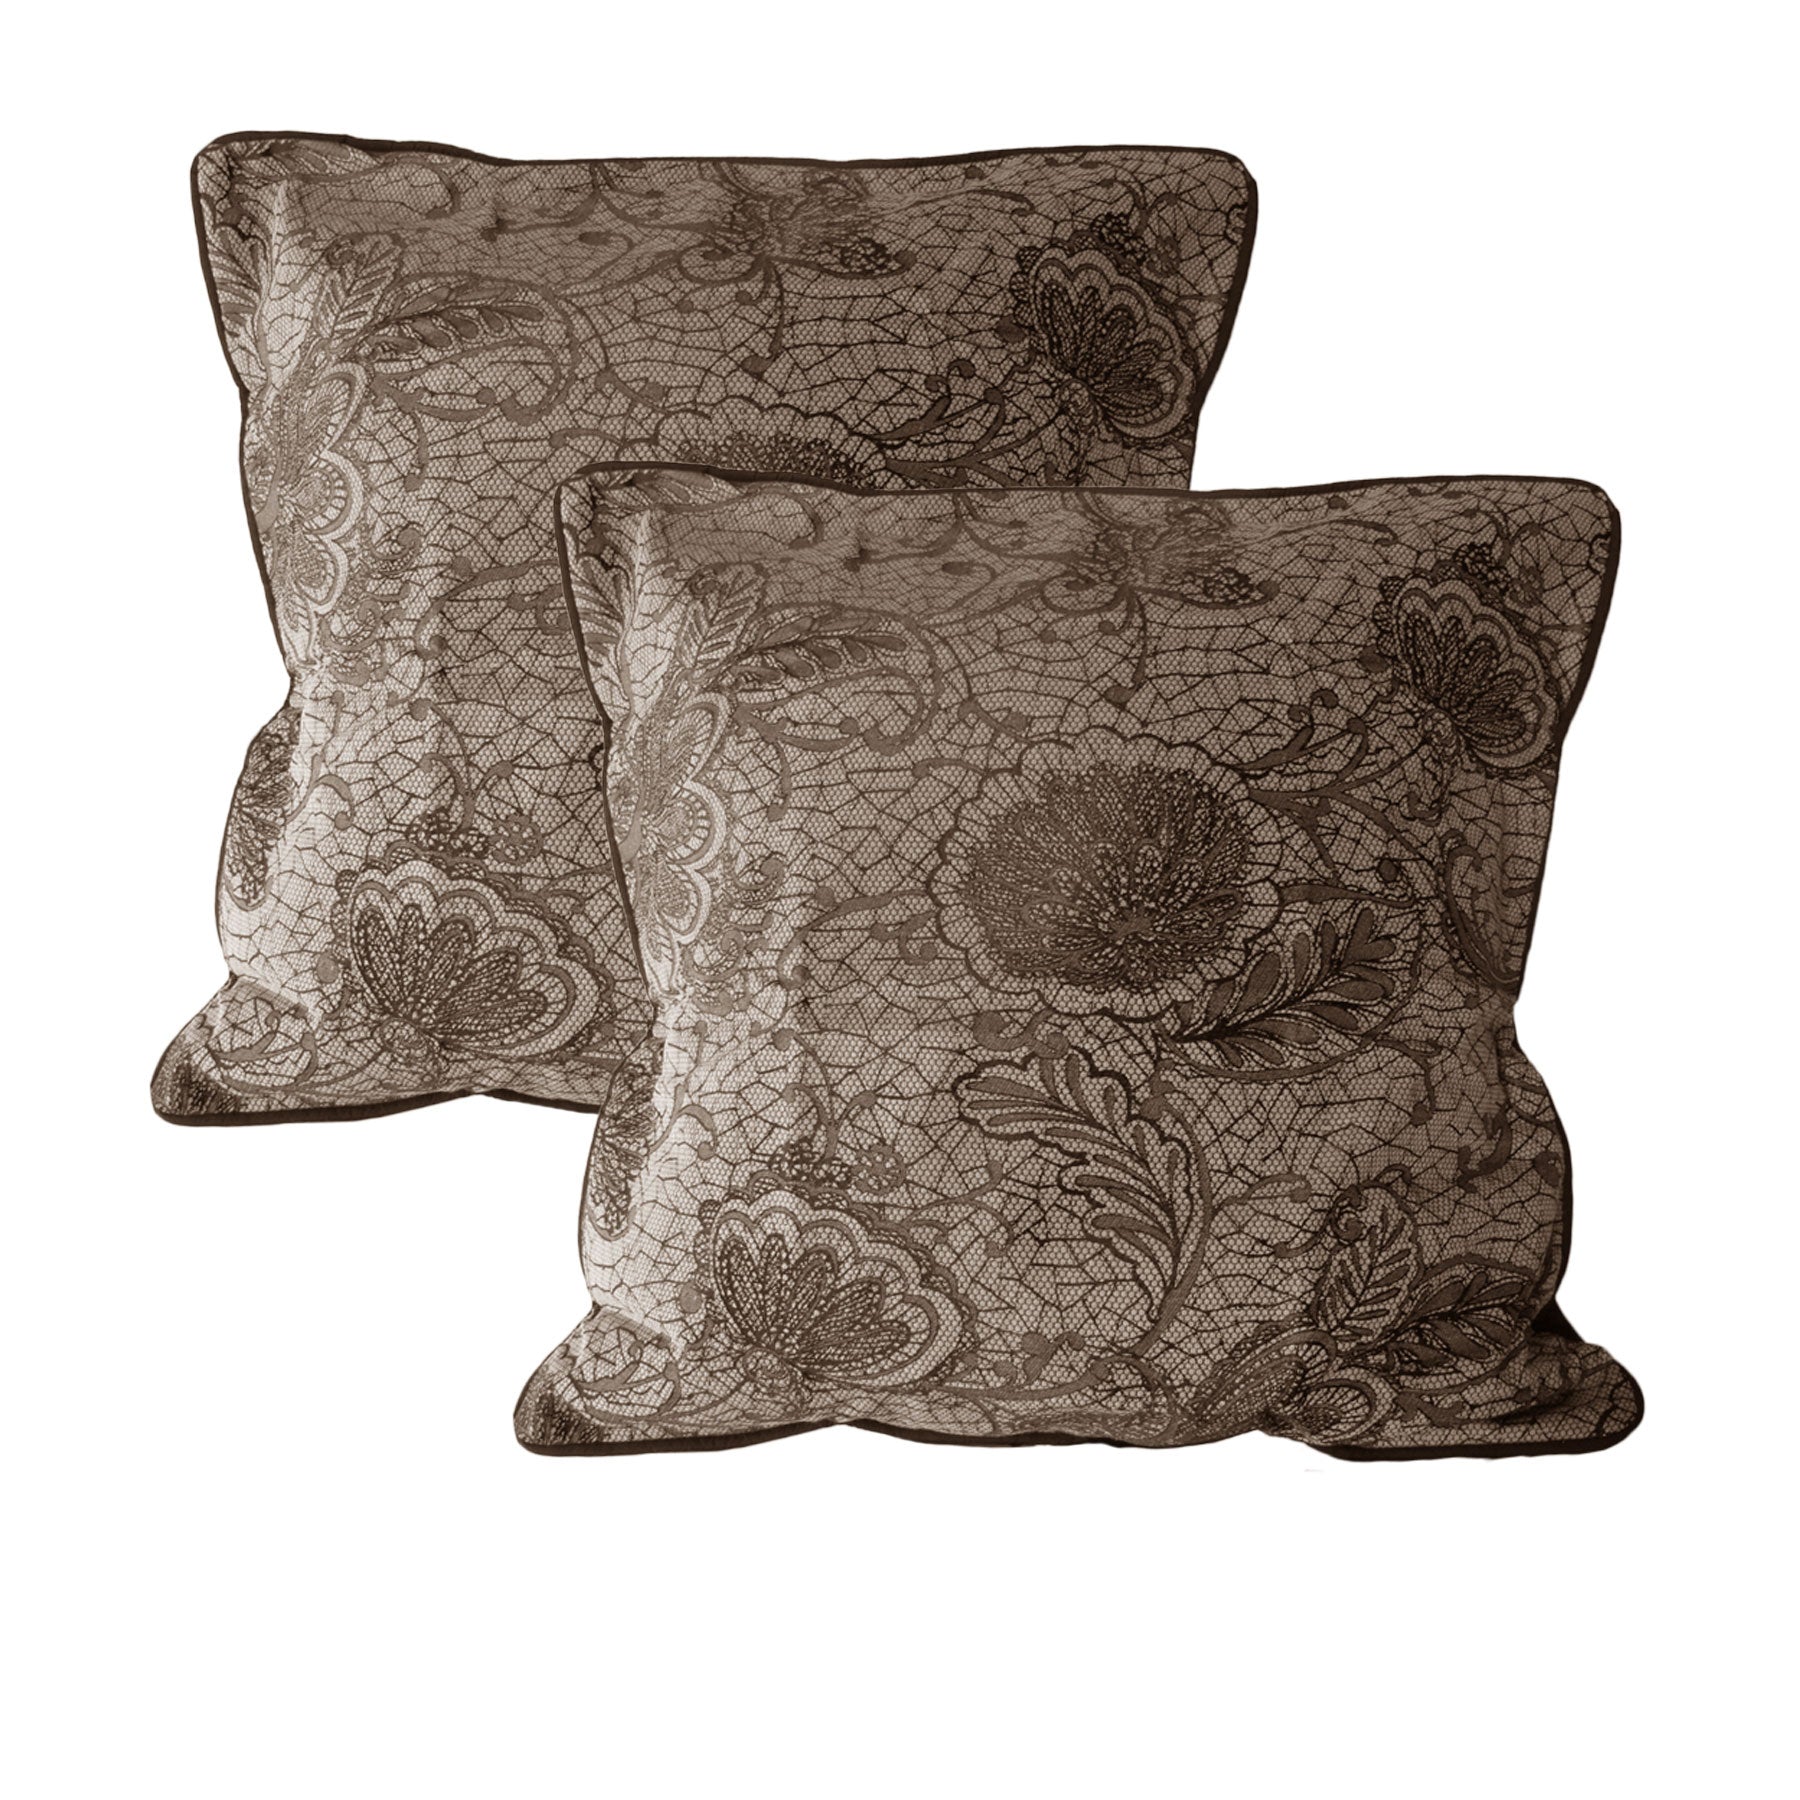 Accessorize Pair of Trudie Lace European Pillowcases Chocolate